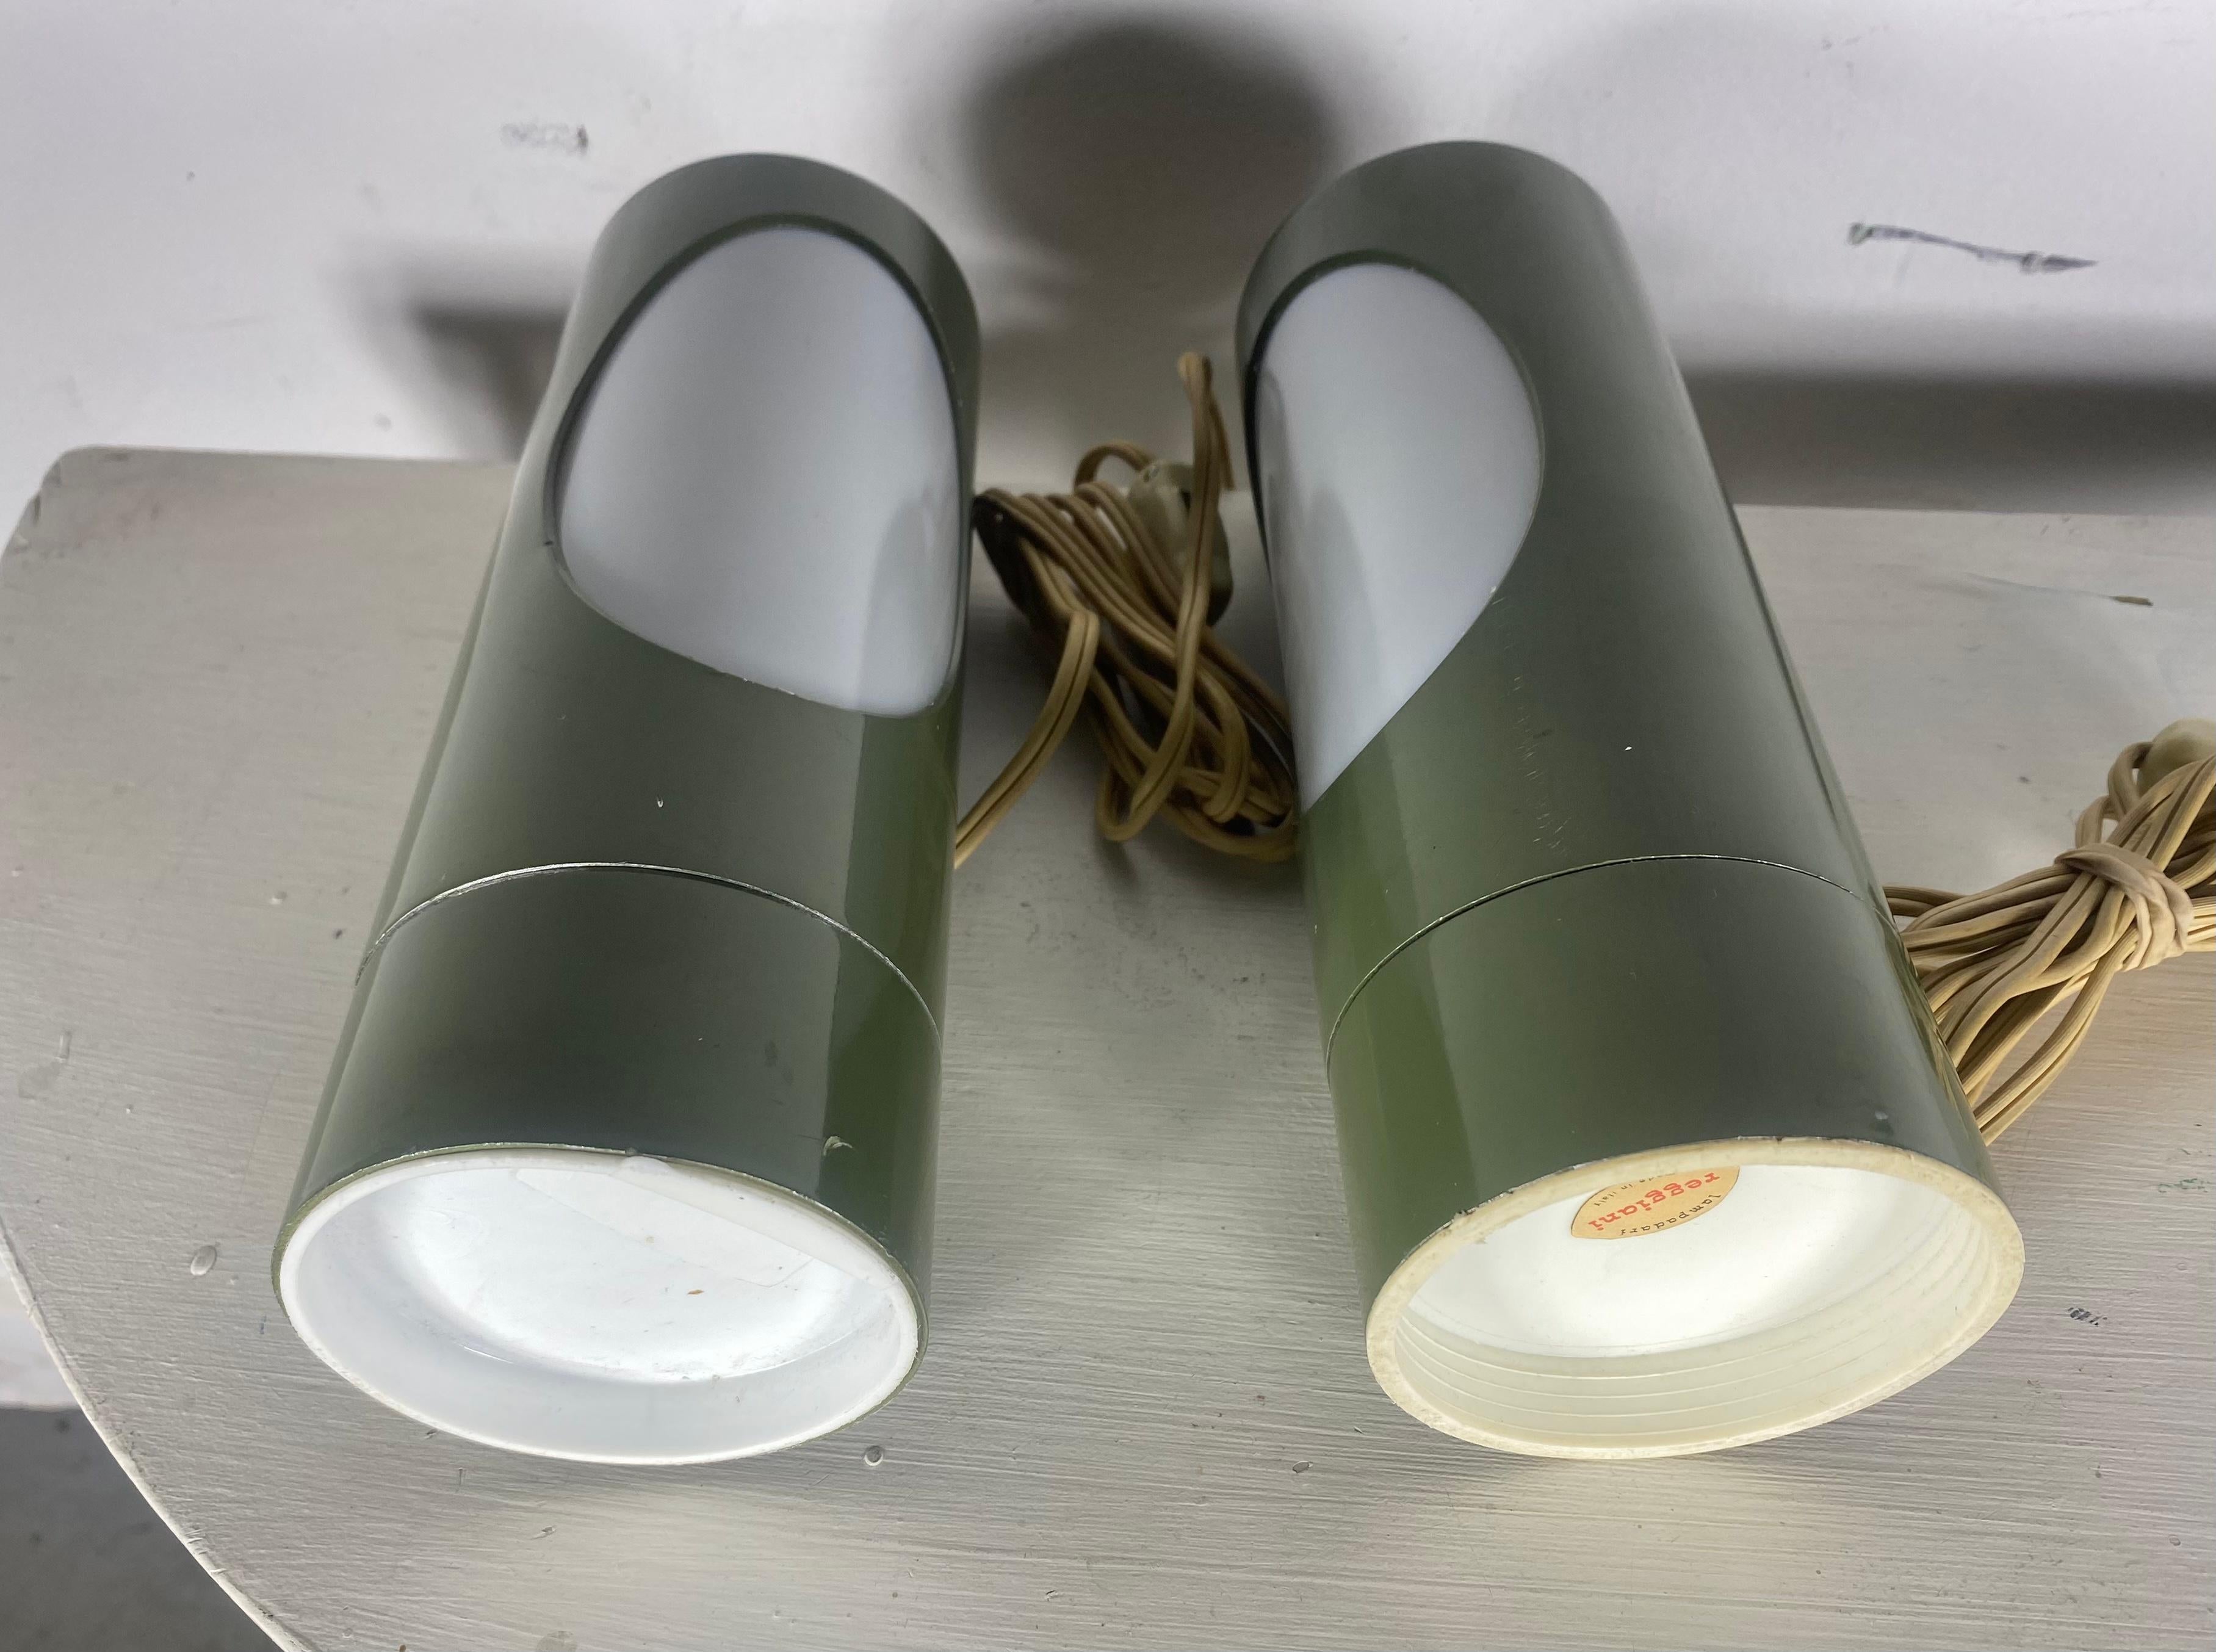 Enameled Italian Space Age Metal Cylinder Table Lamps by Reggiani, 1960s For Sale